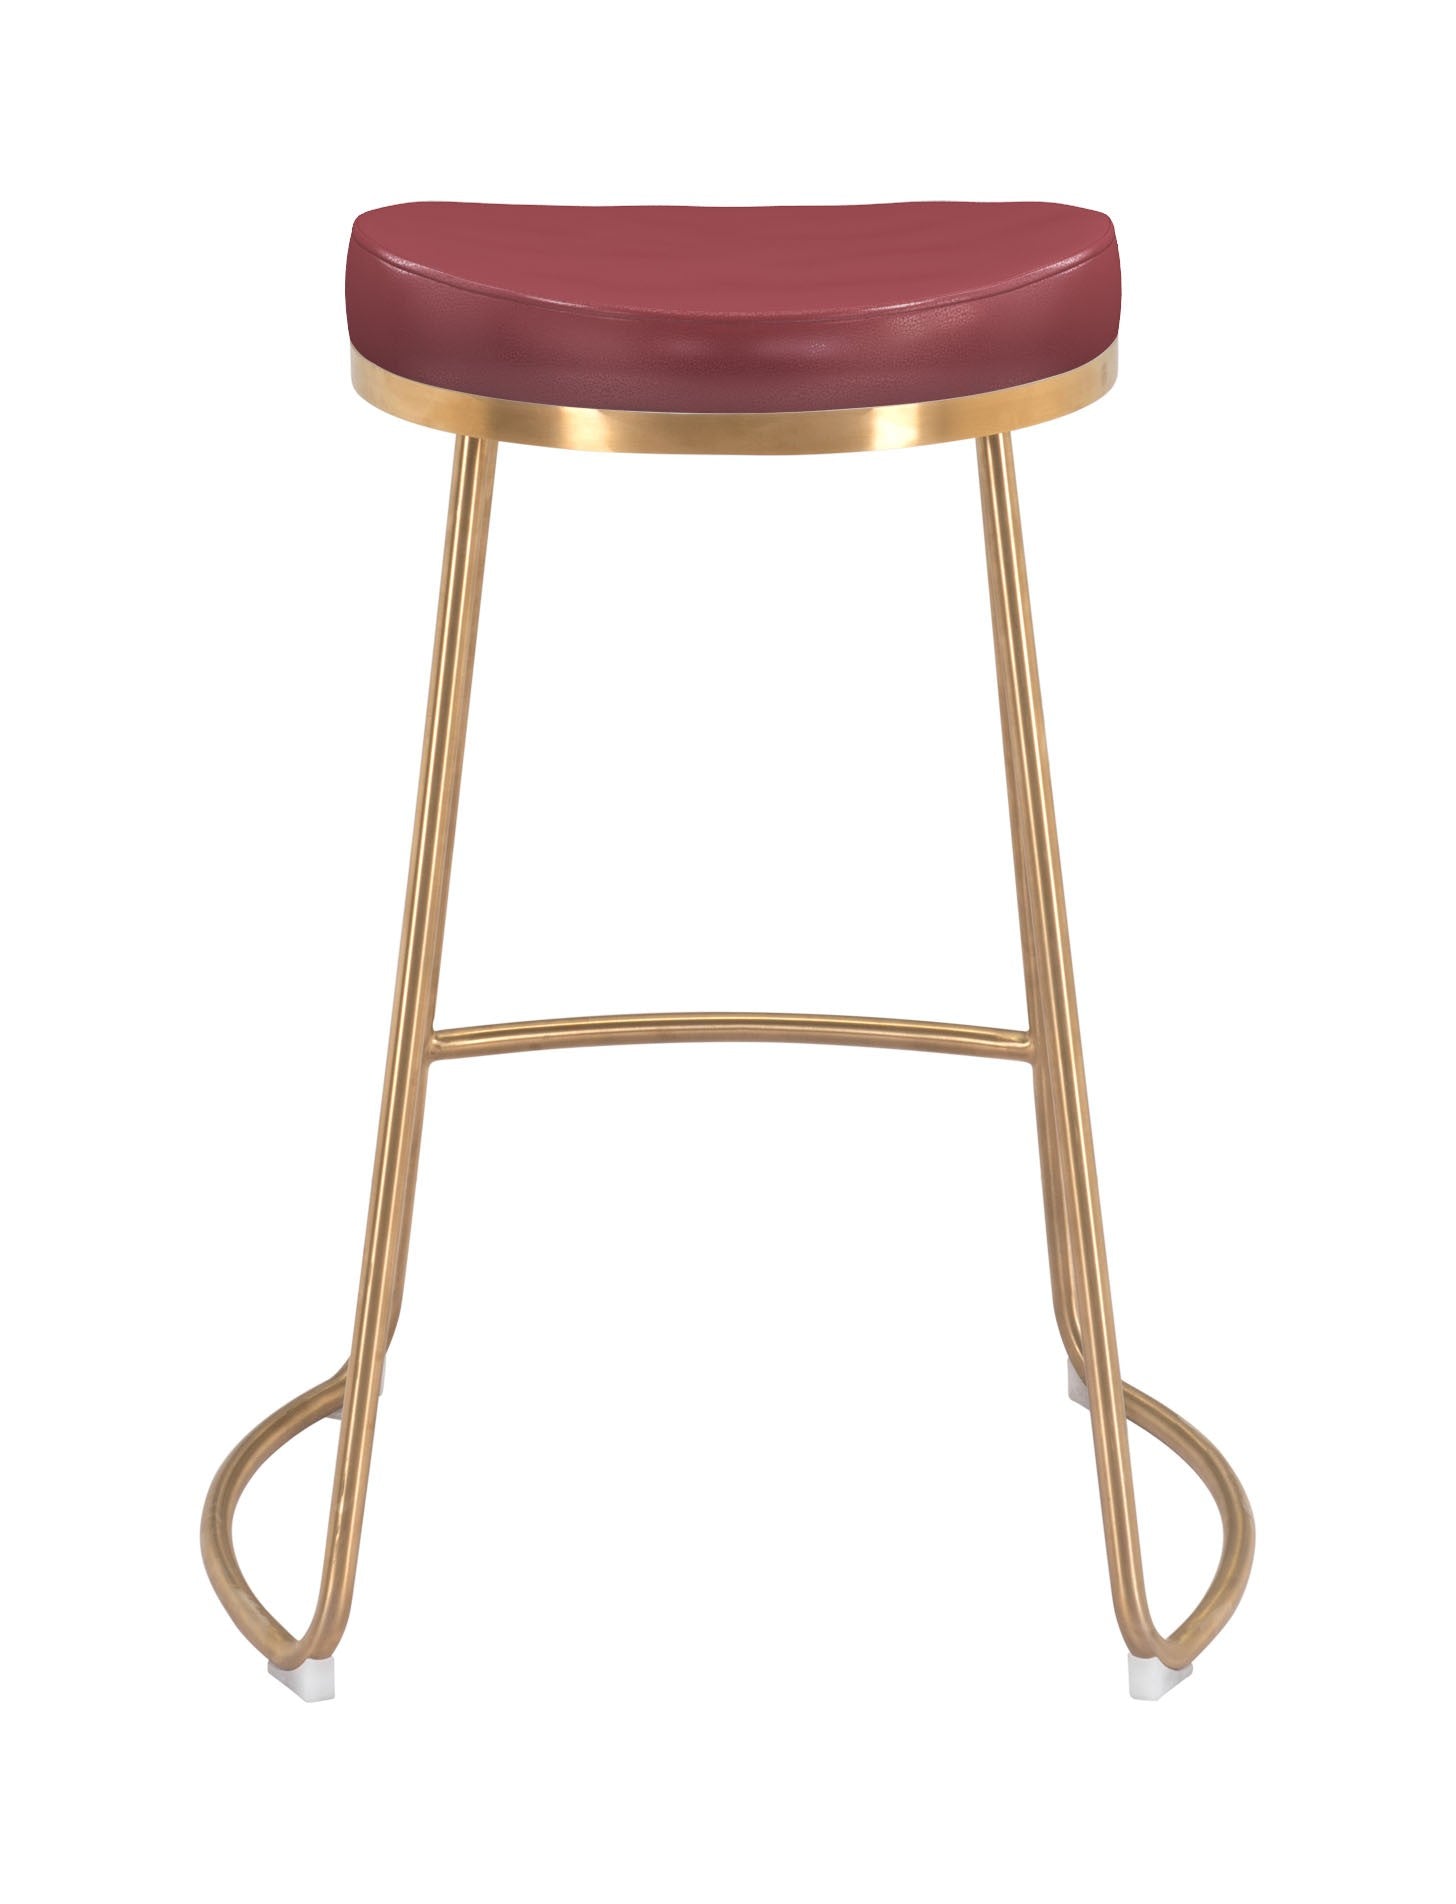 Set of Two " Red And Gold Faux Leather And Stainless Steel Backless Counter Height Bar Chairs